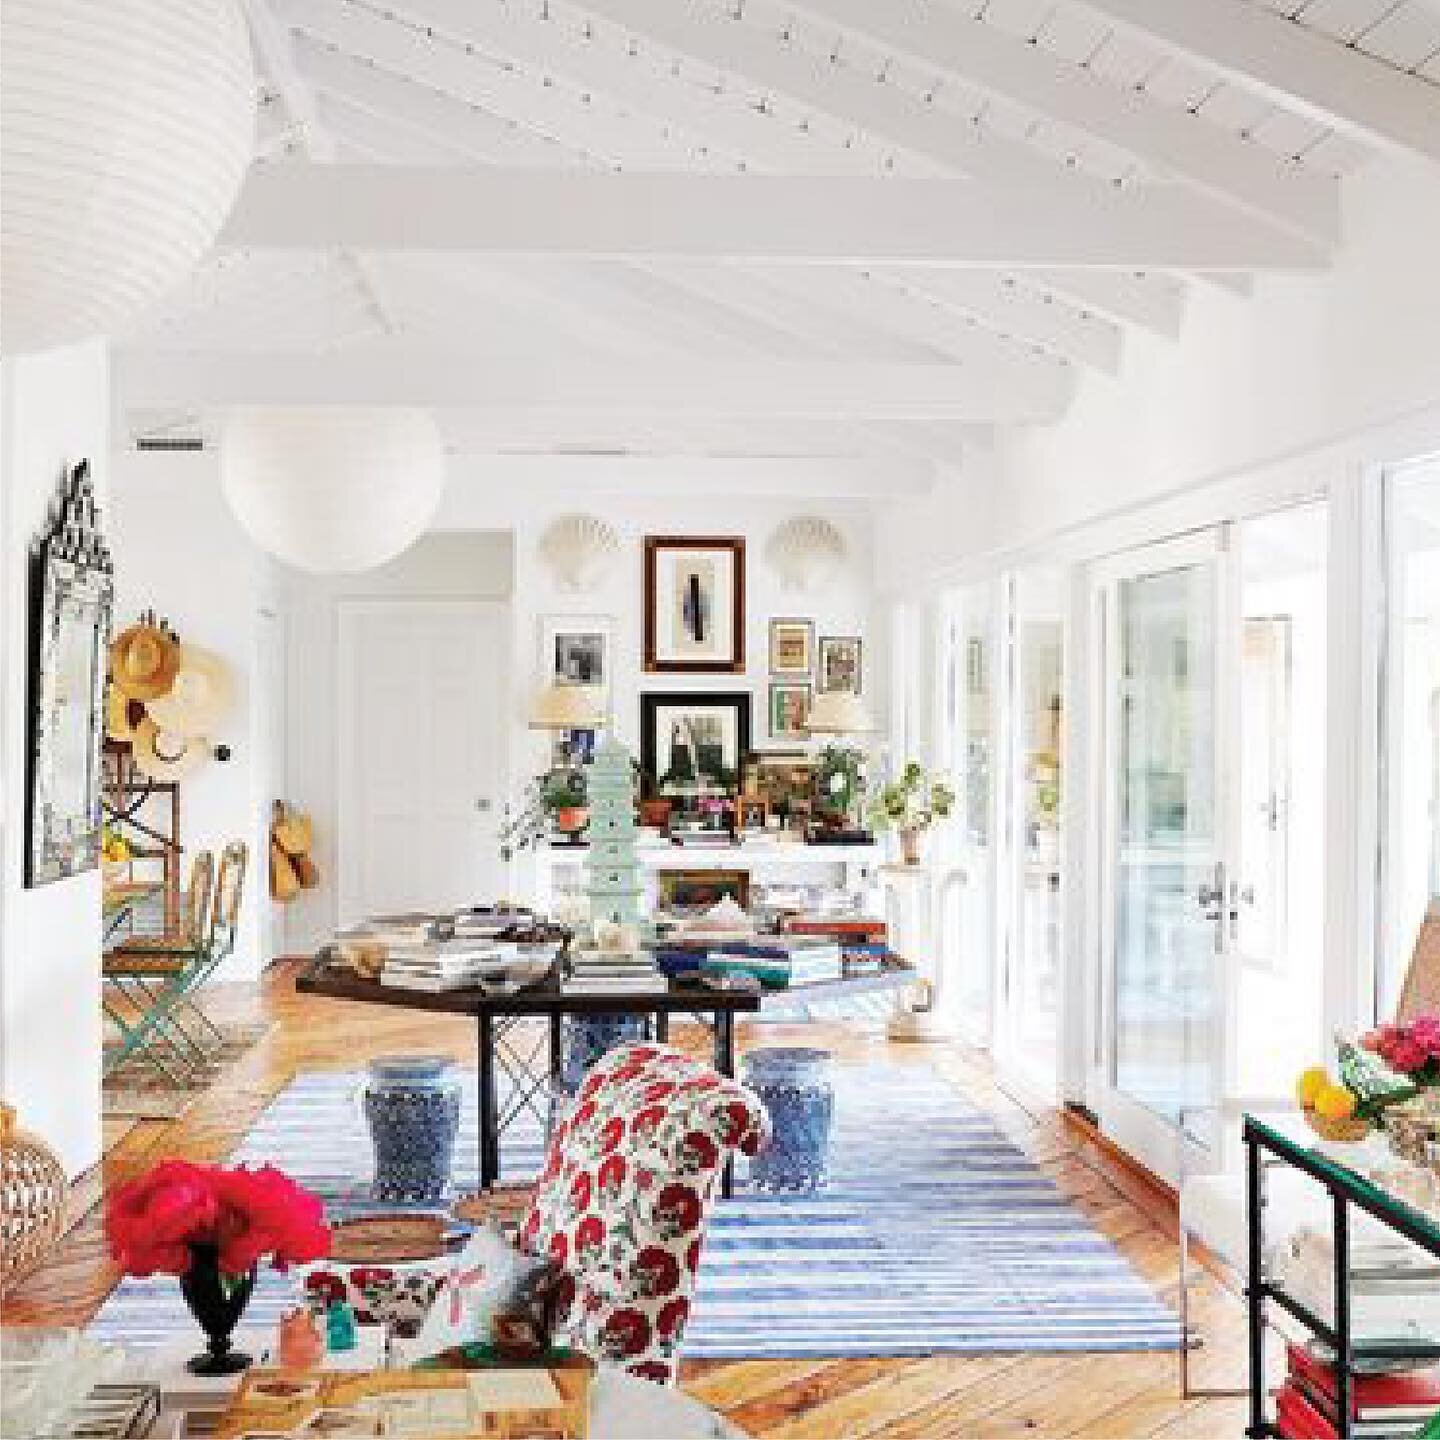 Rebecca de Ravenel's charming LA colorful abode sings with character and carefree style